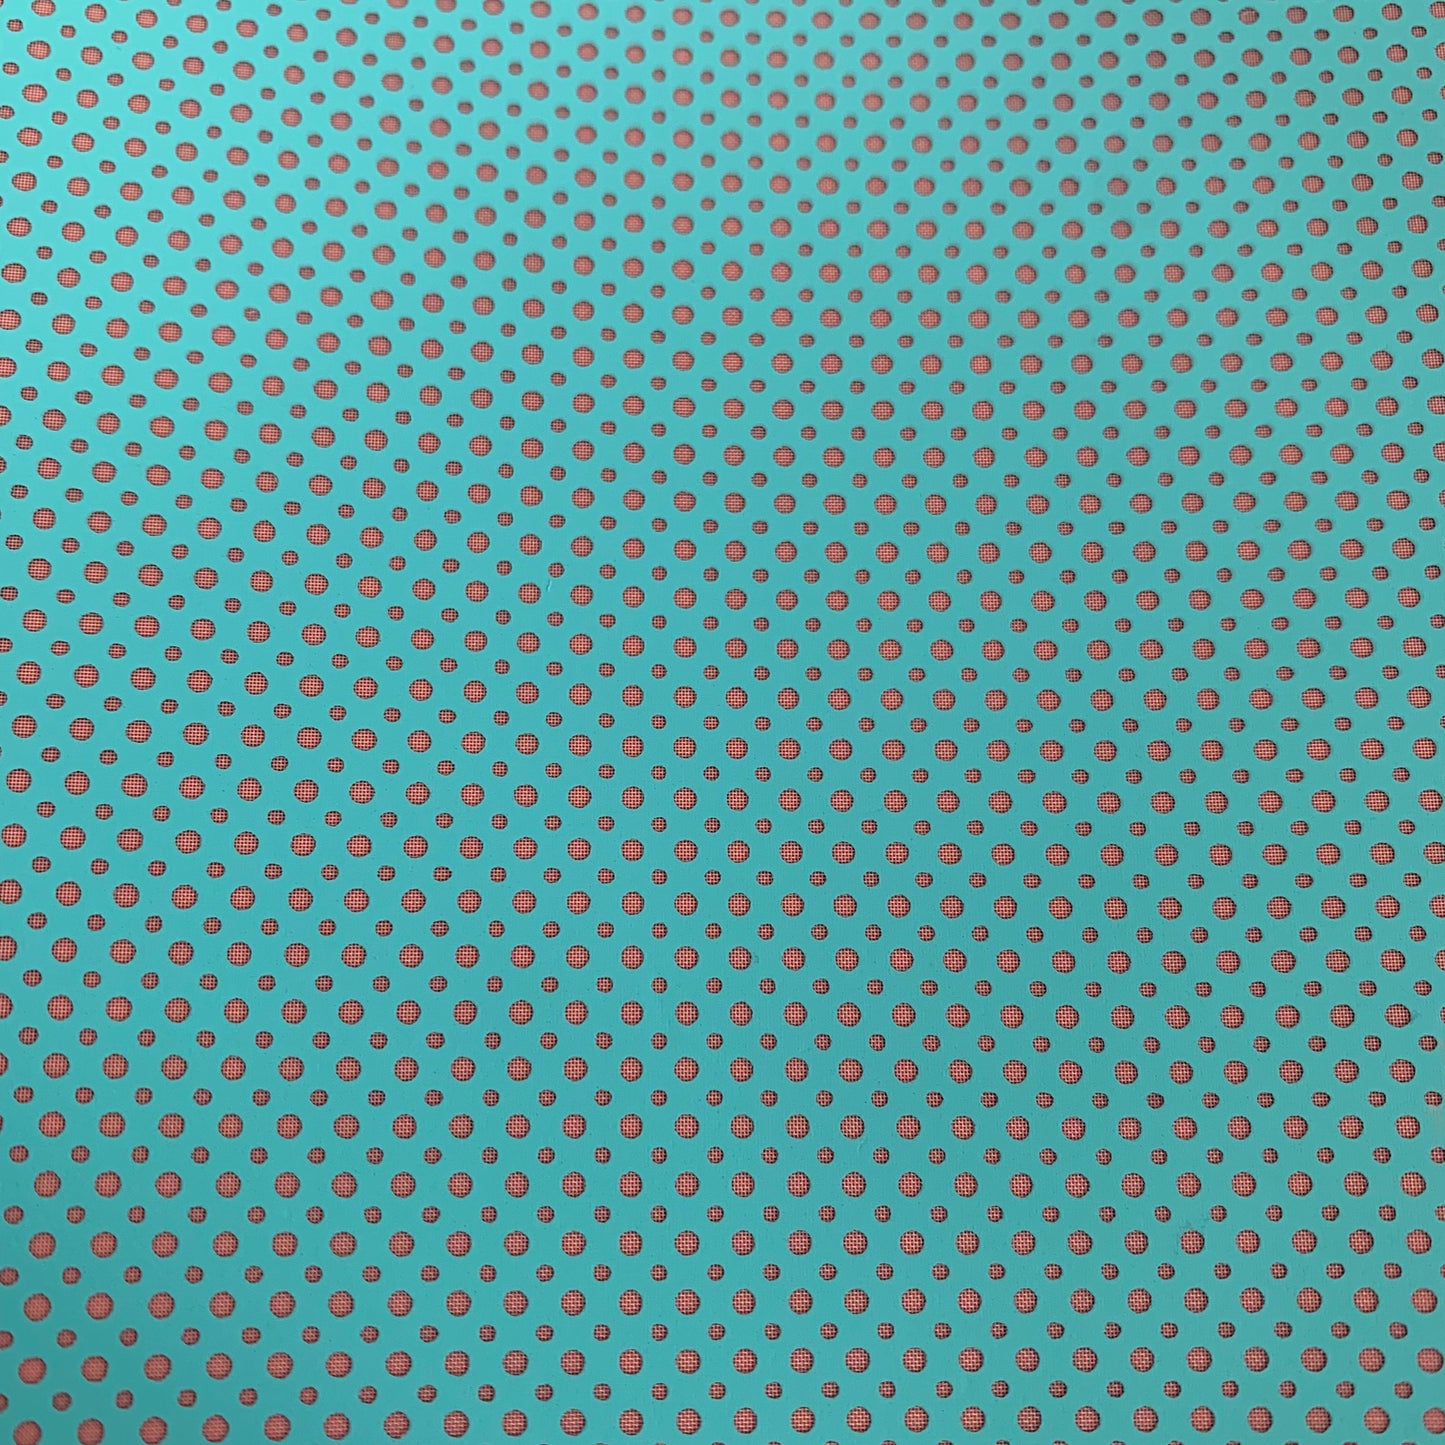 Silk Screen Spotted Polka Dots Stencil for Polymer Clay, Art Jewelry, Mixed Media